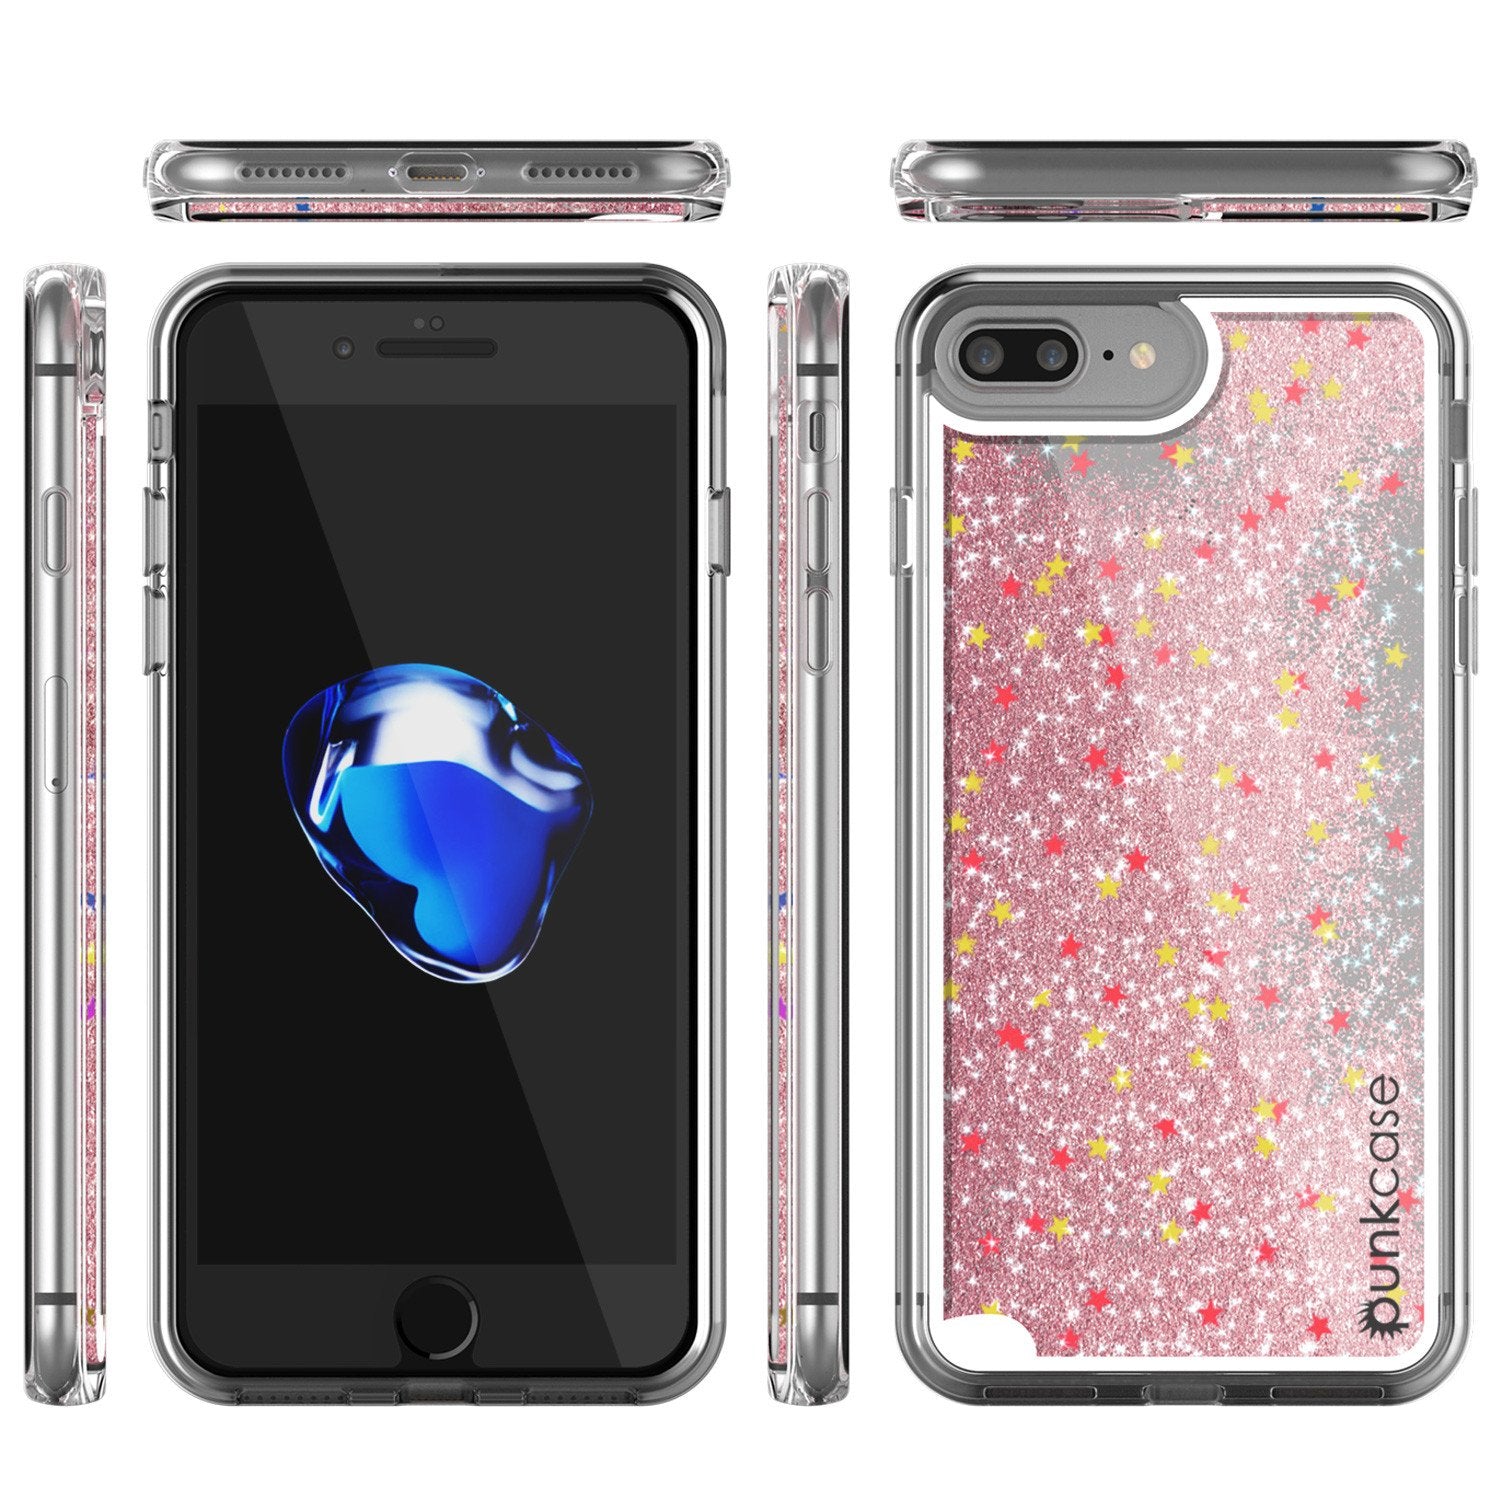 iPhone 7 Plus Case, PunkCase LIQUID Rose Series, Protective Dual Layer Floating Glitter Cover